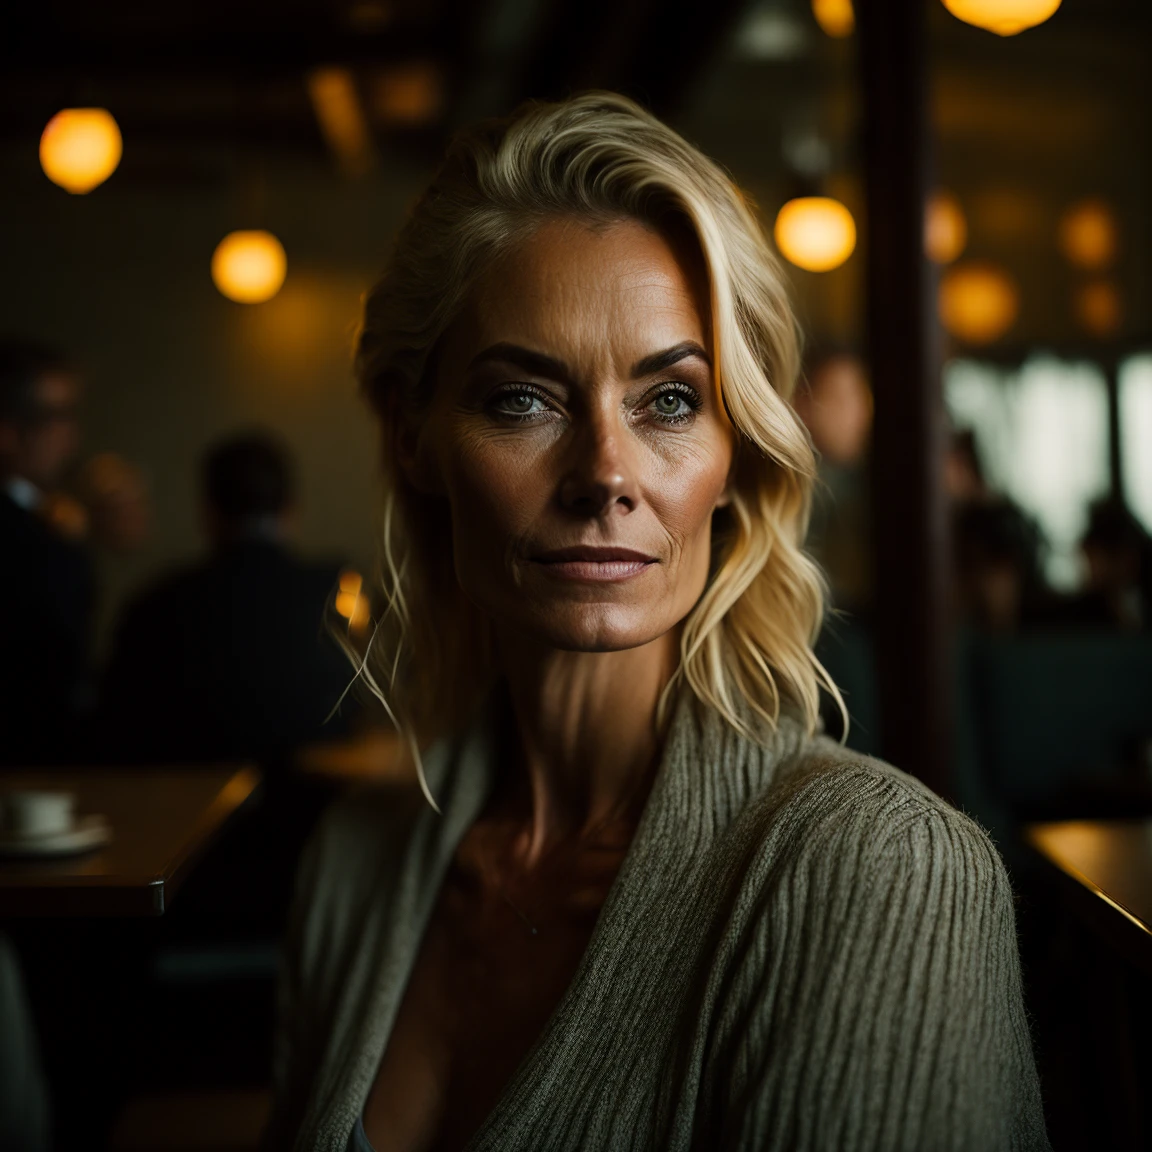 portrait oF a 40 year old blonde woman in a restaurant, clear Facial Features, 電影般的, 35毫米鏡頭, F/1.8, 重点照明, 全域照明